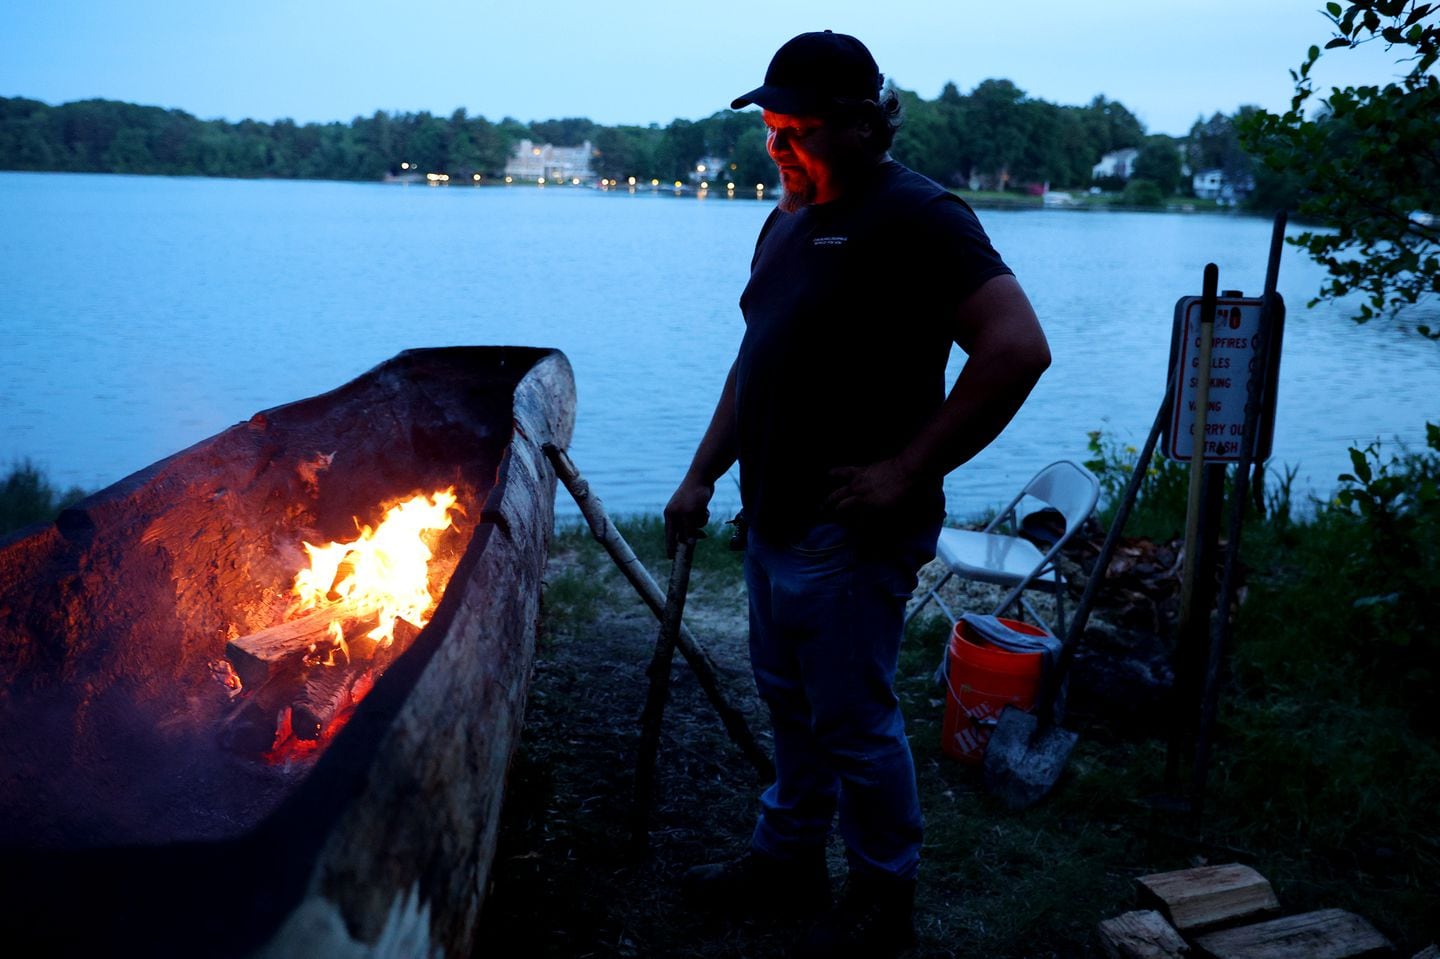 The fire from the inside of a dugout canoe, referred to by Indigenous people as a mishoon, lit the face of George Bearclaw as he took the night shift to keep an eye on the flames and continue to scrape and shape the mishoon on the shores of Lake Quinsigamond in Shrewsbury. For the first time since the 1640s, a mishoon burned on the shores of Lake Quinsigamond as  members of the Hassanamisco band of the Nipmuc held a weeklong traditional burn.